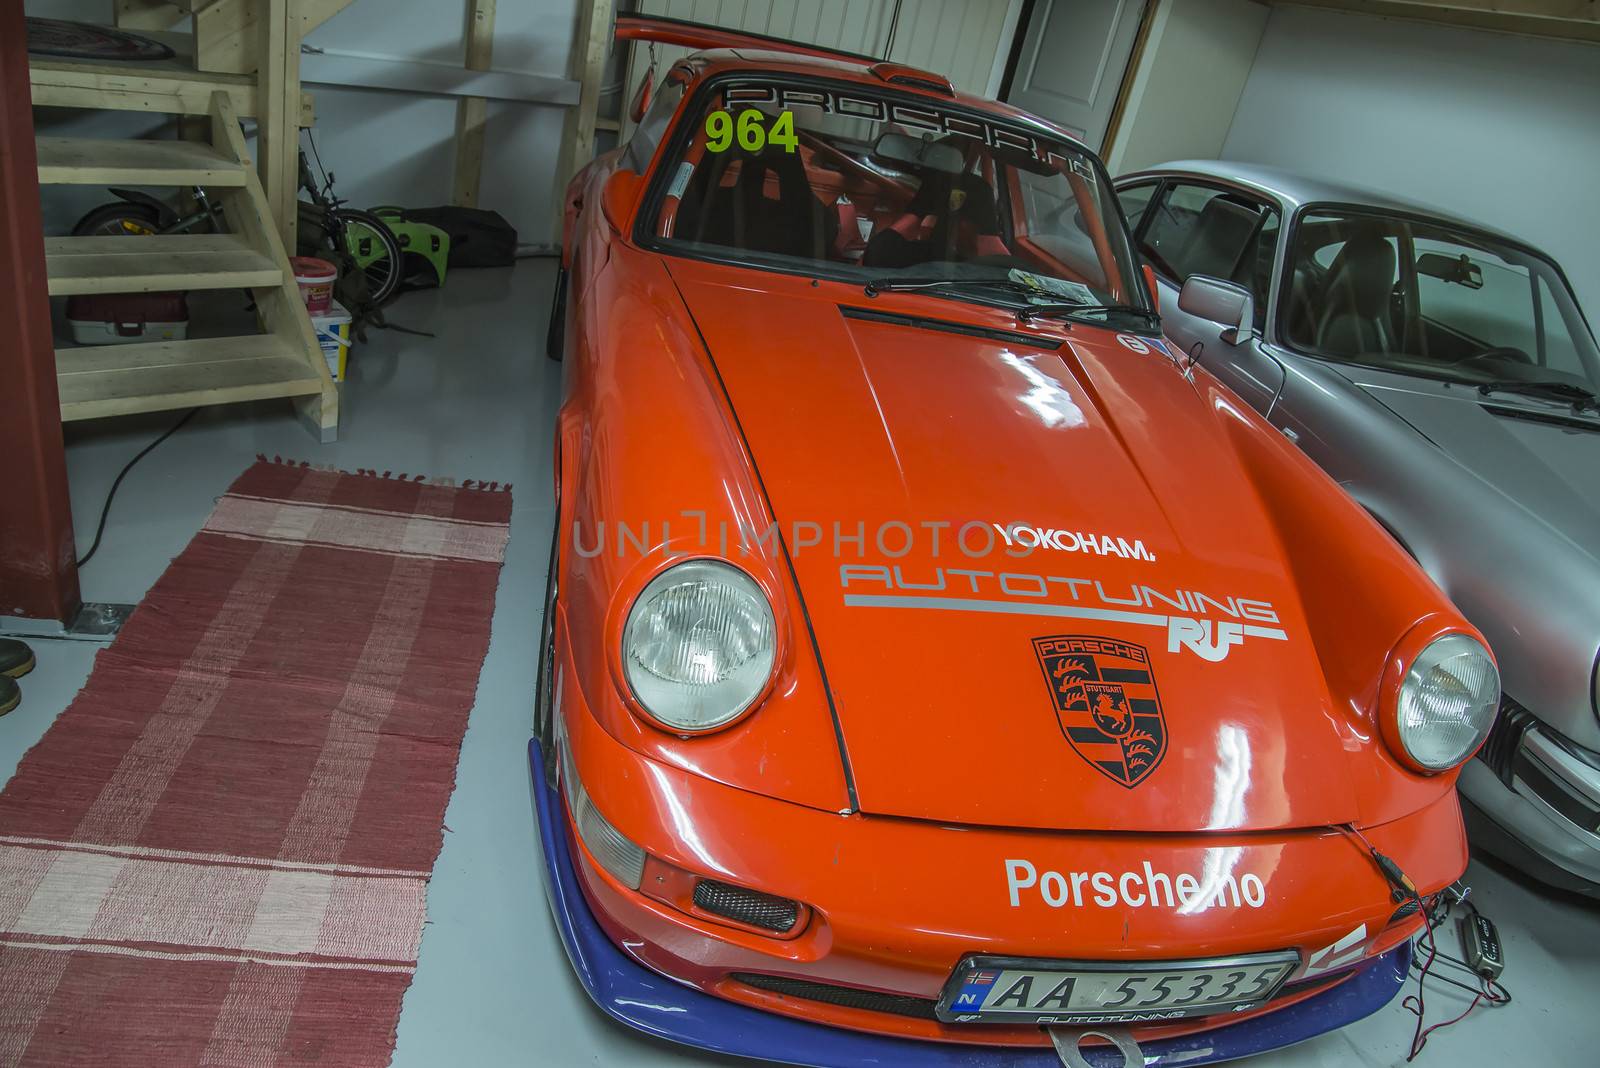 race cars in a garage by steirus